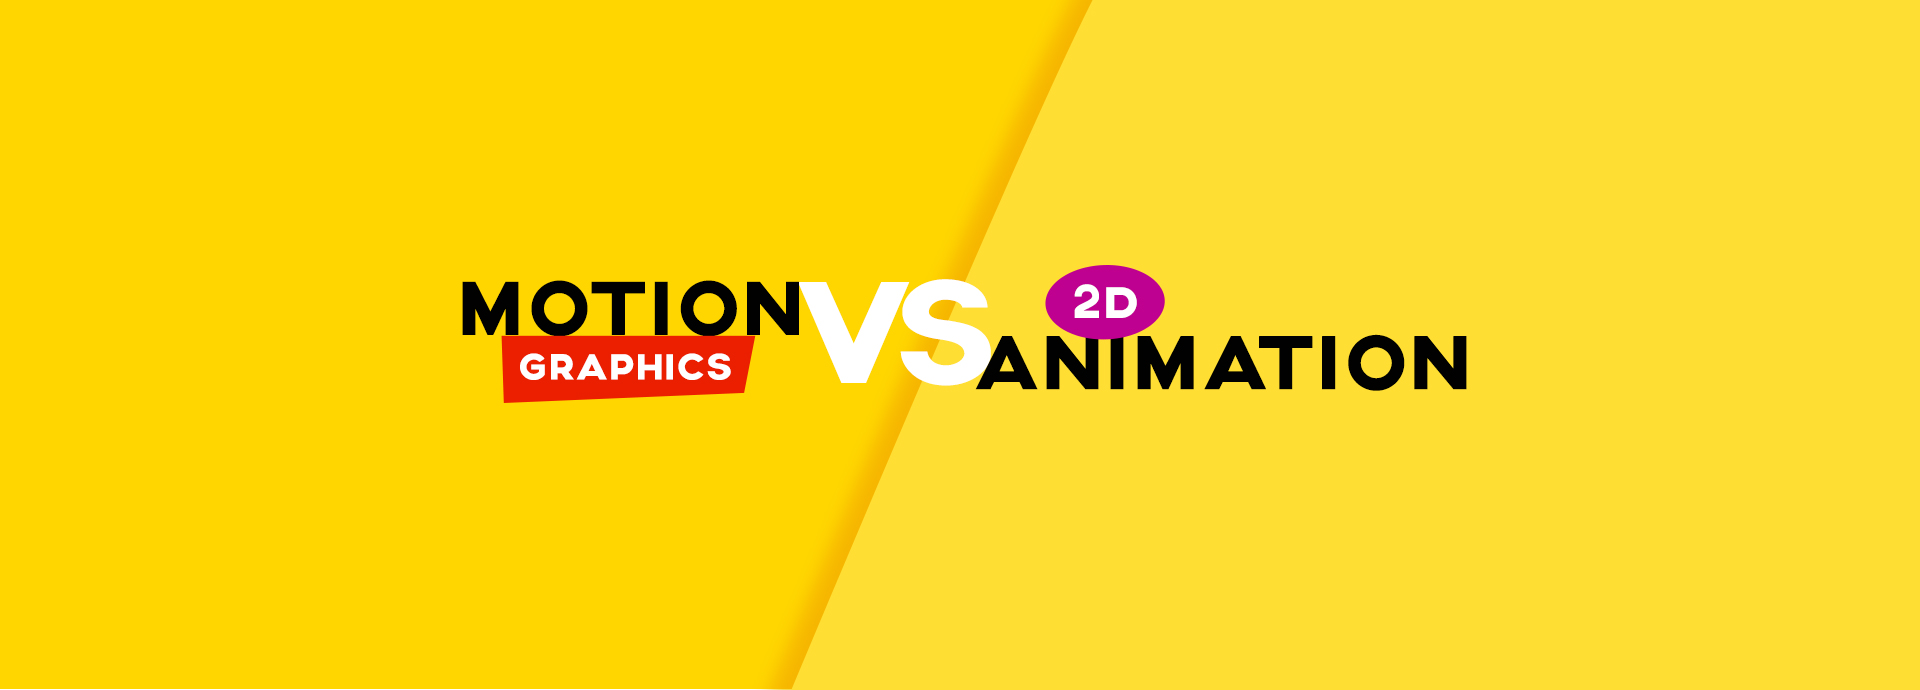 Motion Graphics and Animation: What are the Differences?